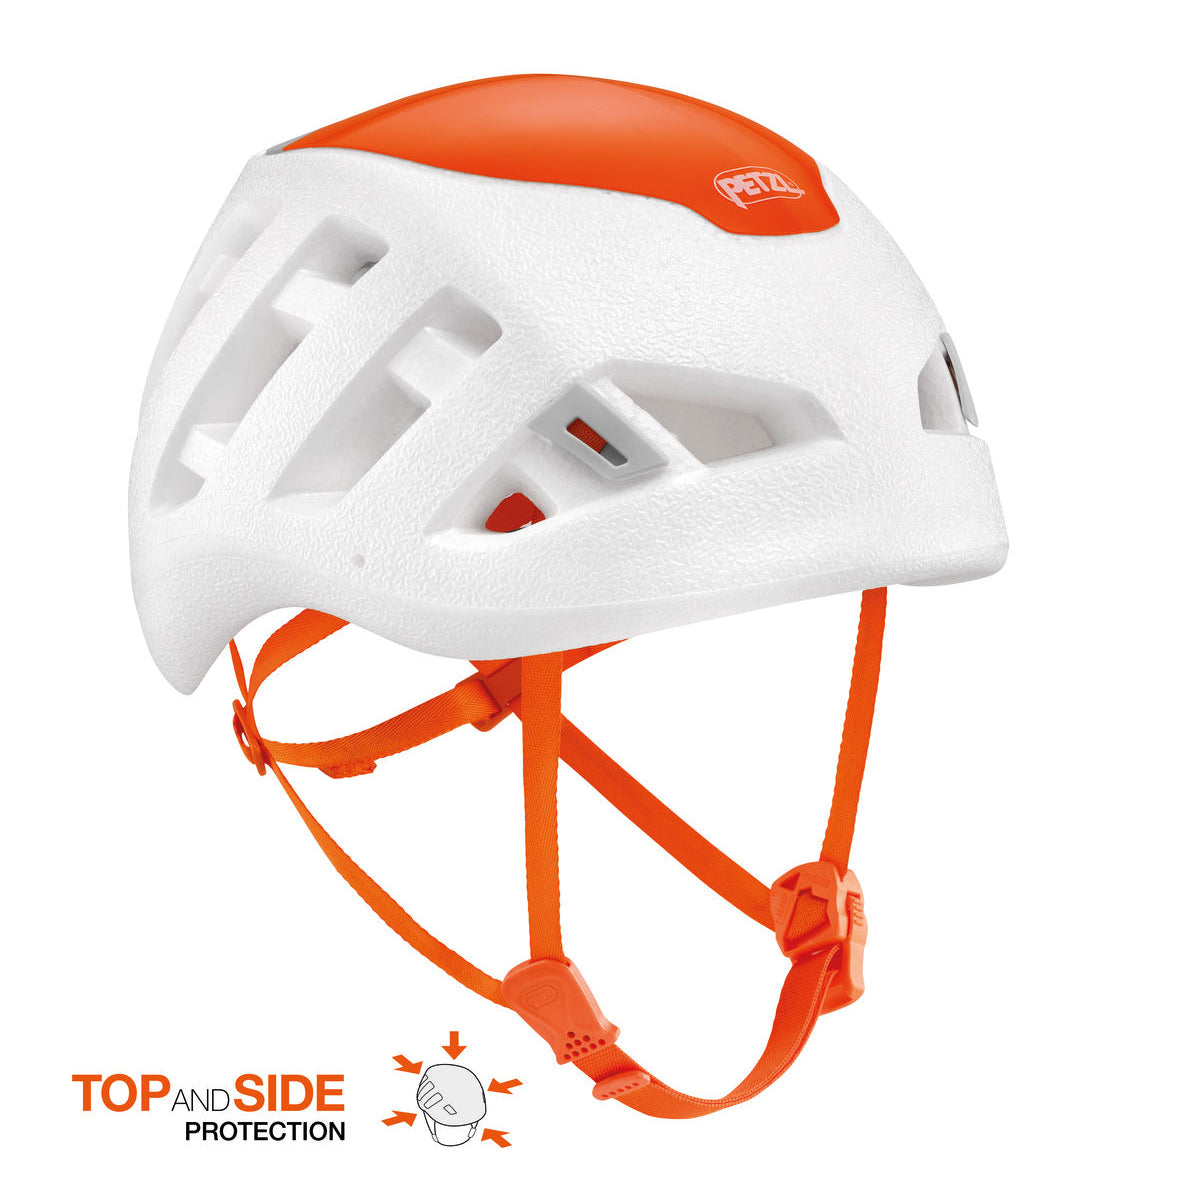 The petzl sirocco helmet front and side view